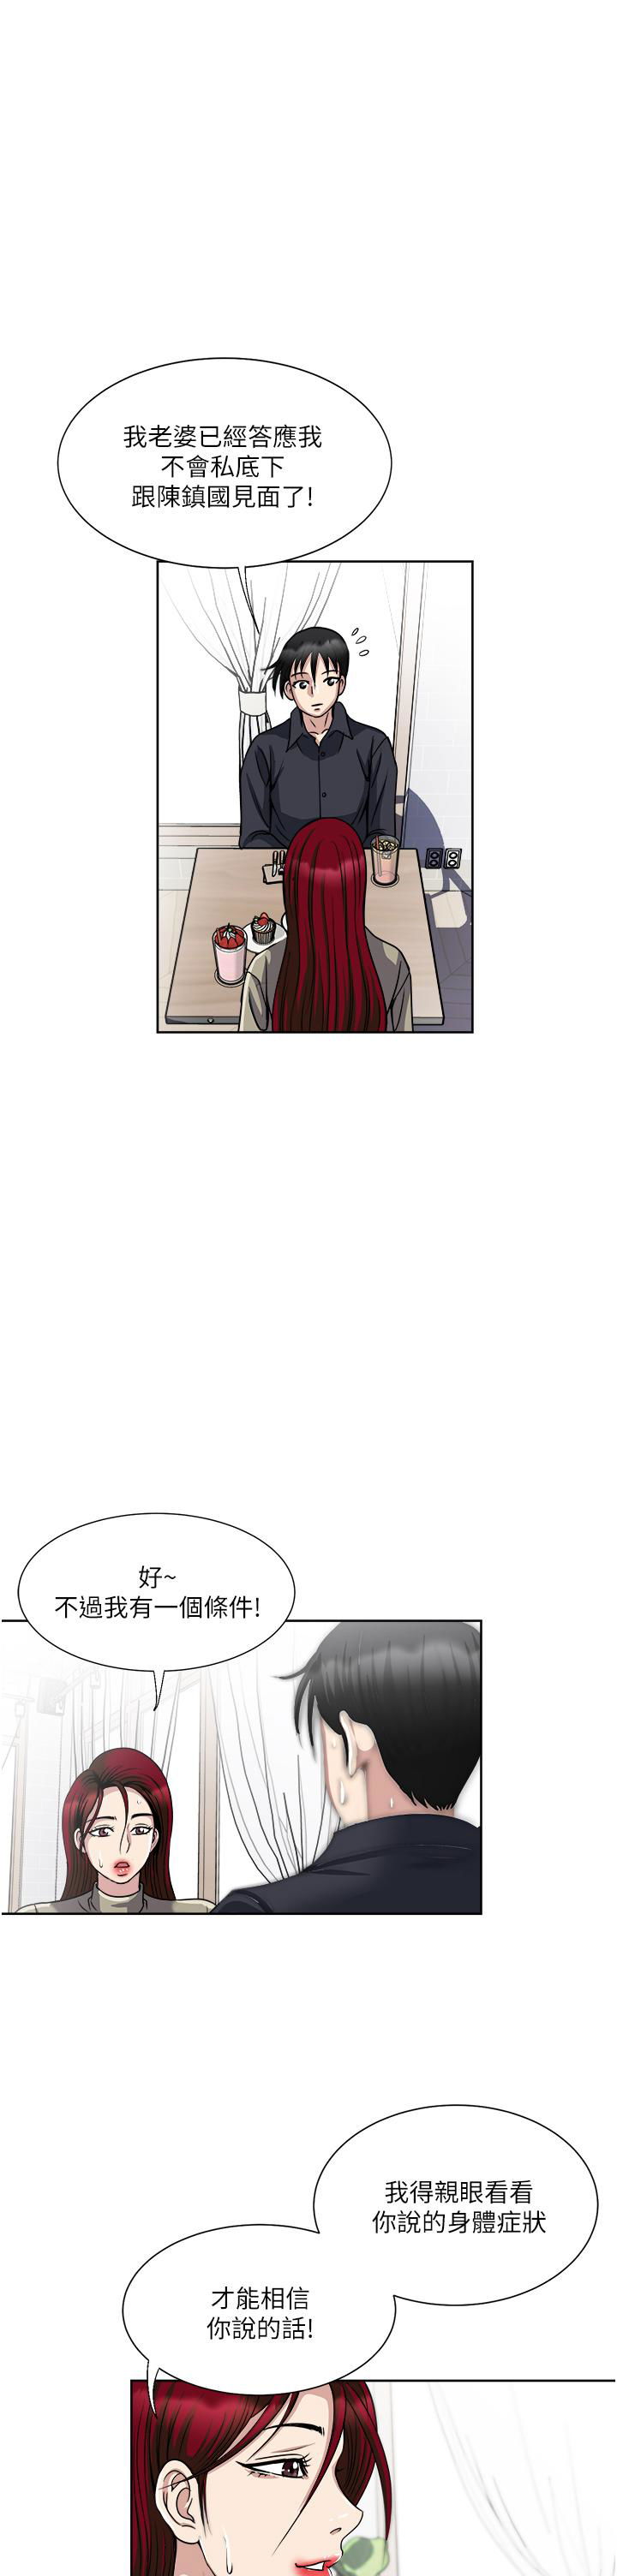 just-once-raw-chap-37-28